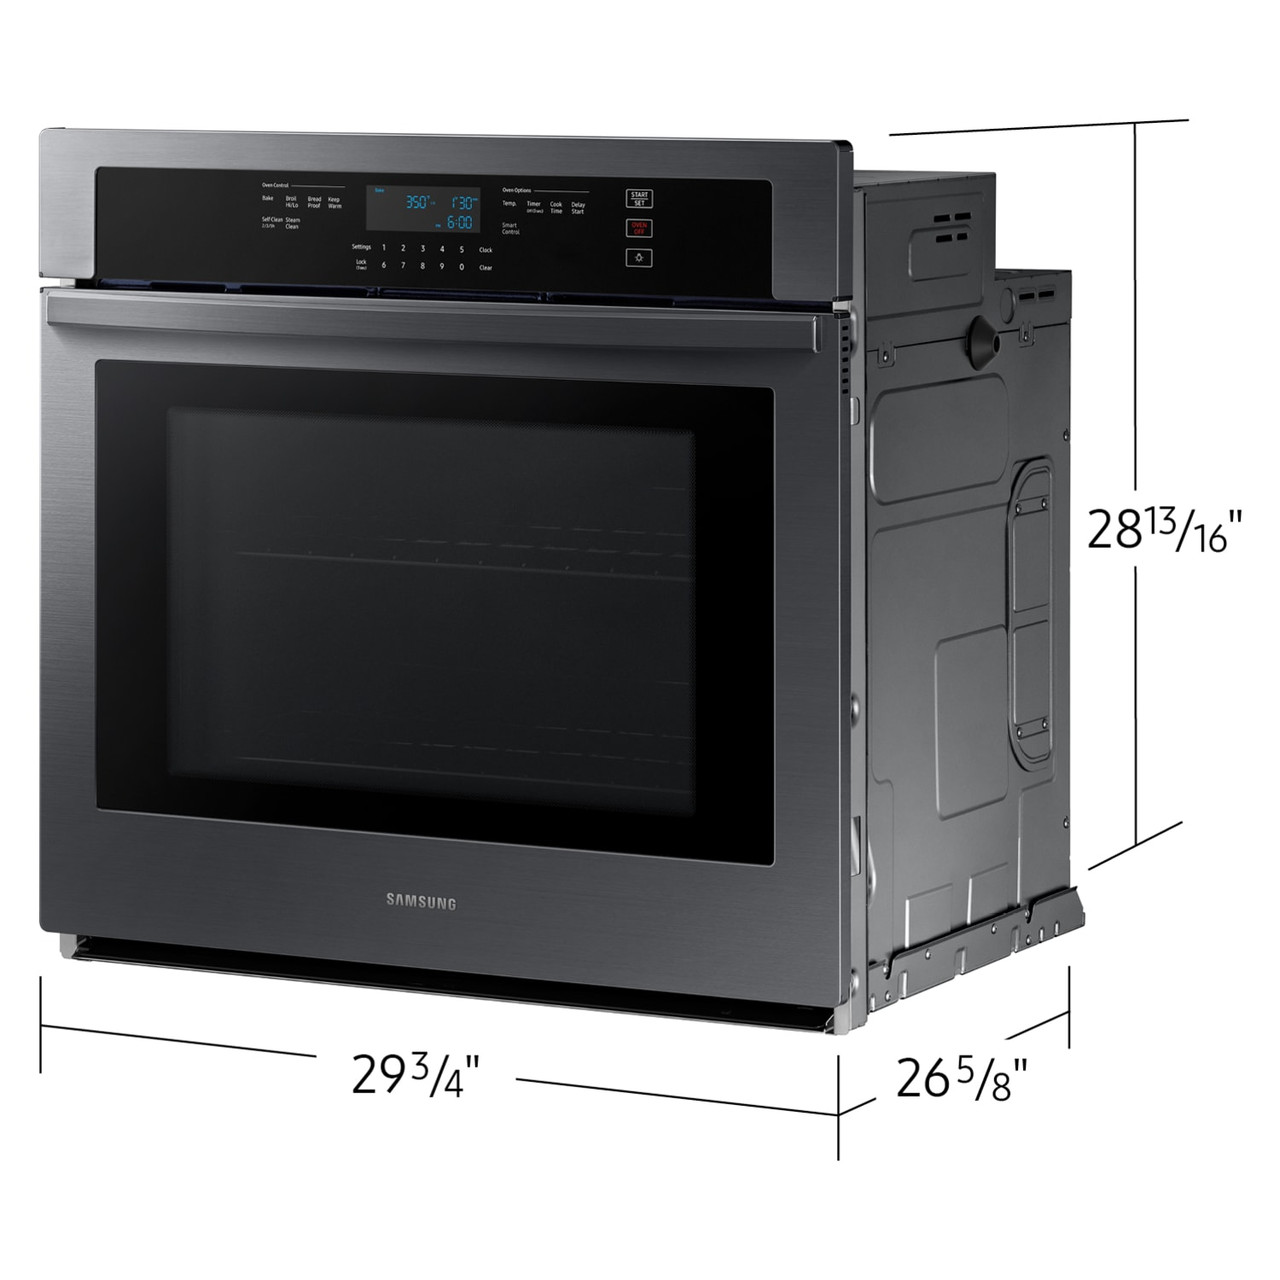 Samsung 30” Single Oven, Self-Clean/Steam Clean, Glass Touch Controls in Black Stainless Steel